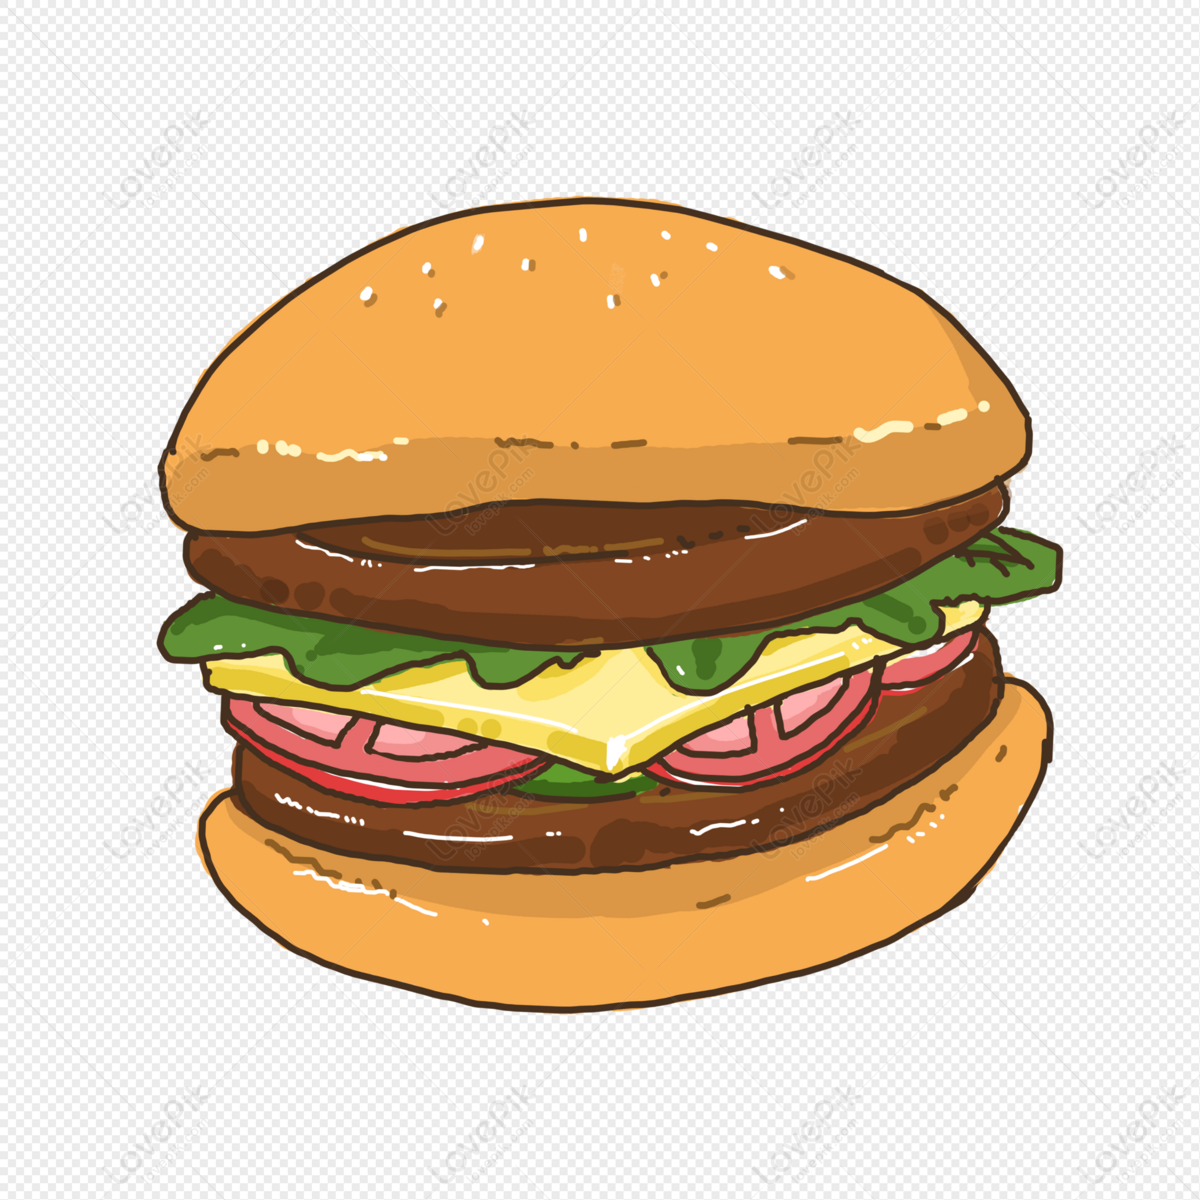 Hamburg Food Fast Food Cartoon Free PNG And Clipart Image For Free Download  - Lovepik | 401092439